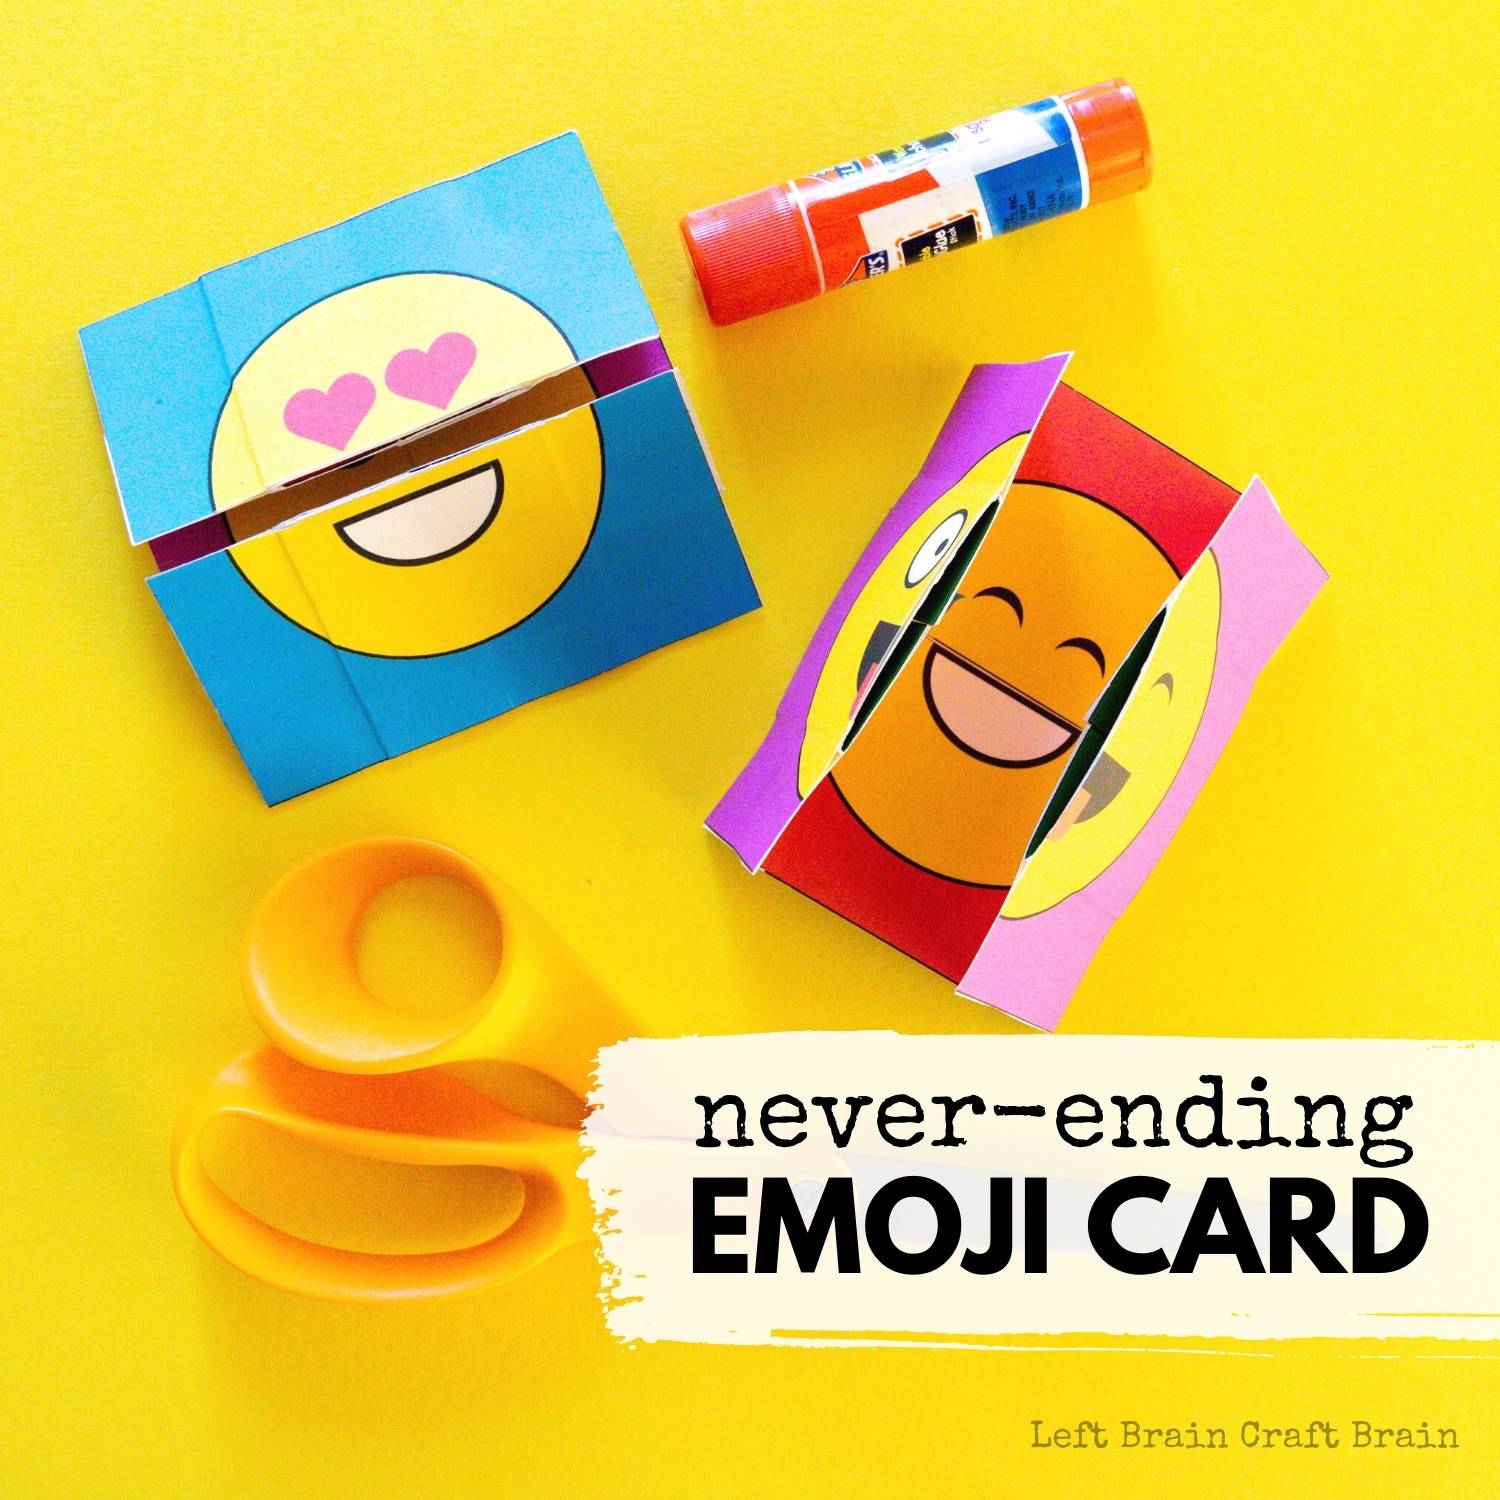 Make this fun never-ending emoji card for an entertaining paper craft activity that will get used long after you've made it. Makes a great gift, too!